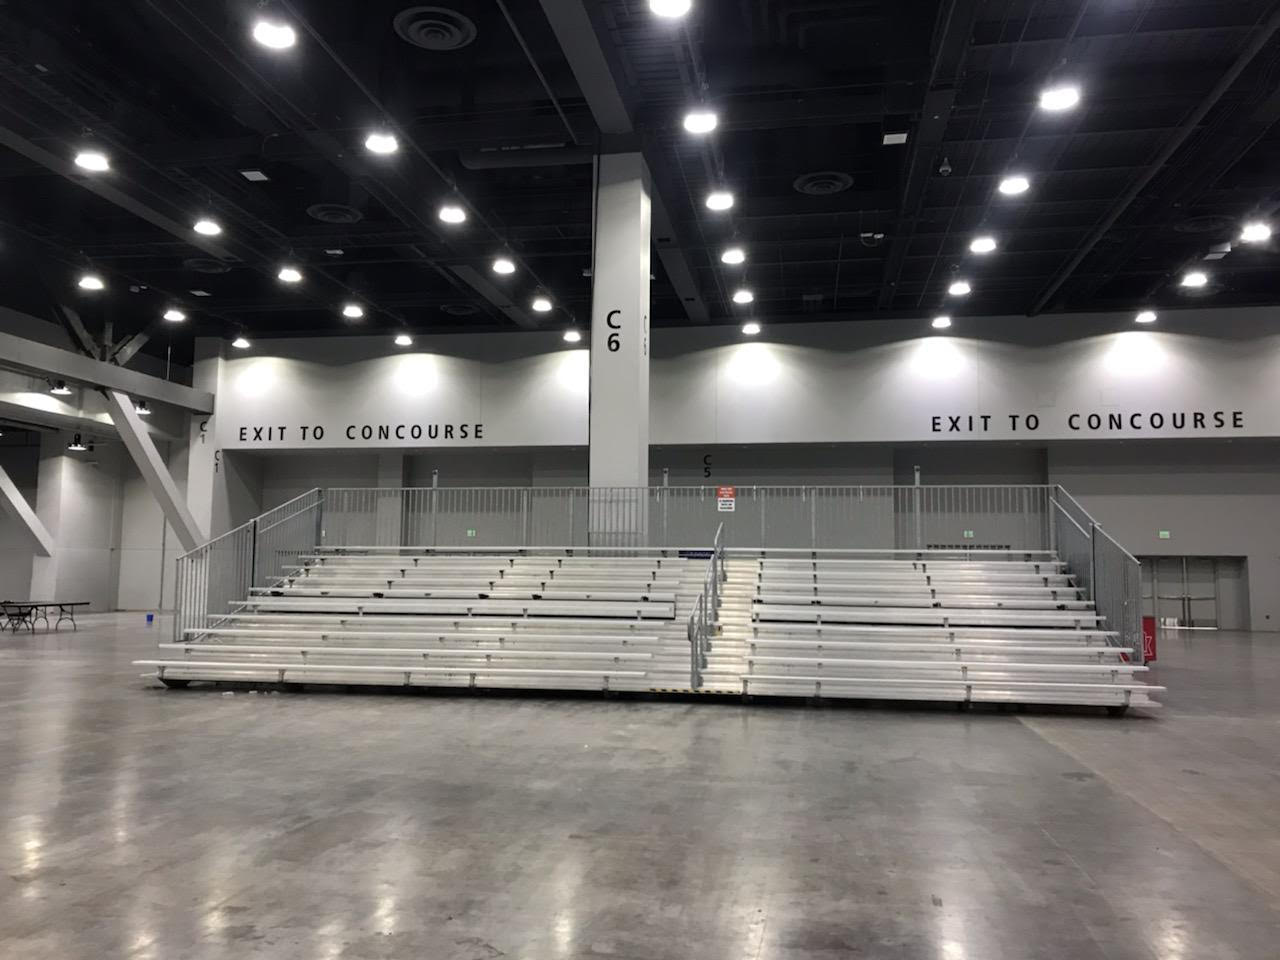 Bleachers on Demand provides rental bleachers for indoor events at venues such as convention centers in Ohio